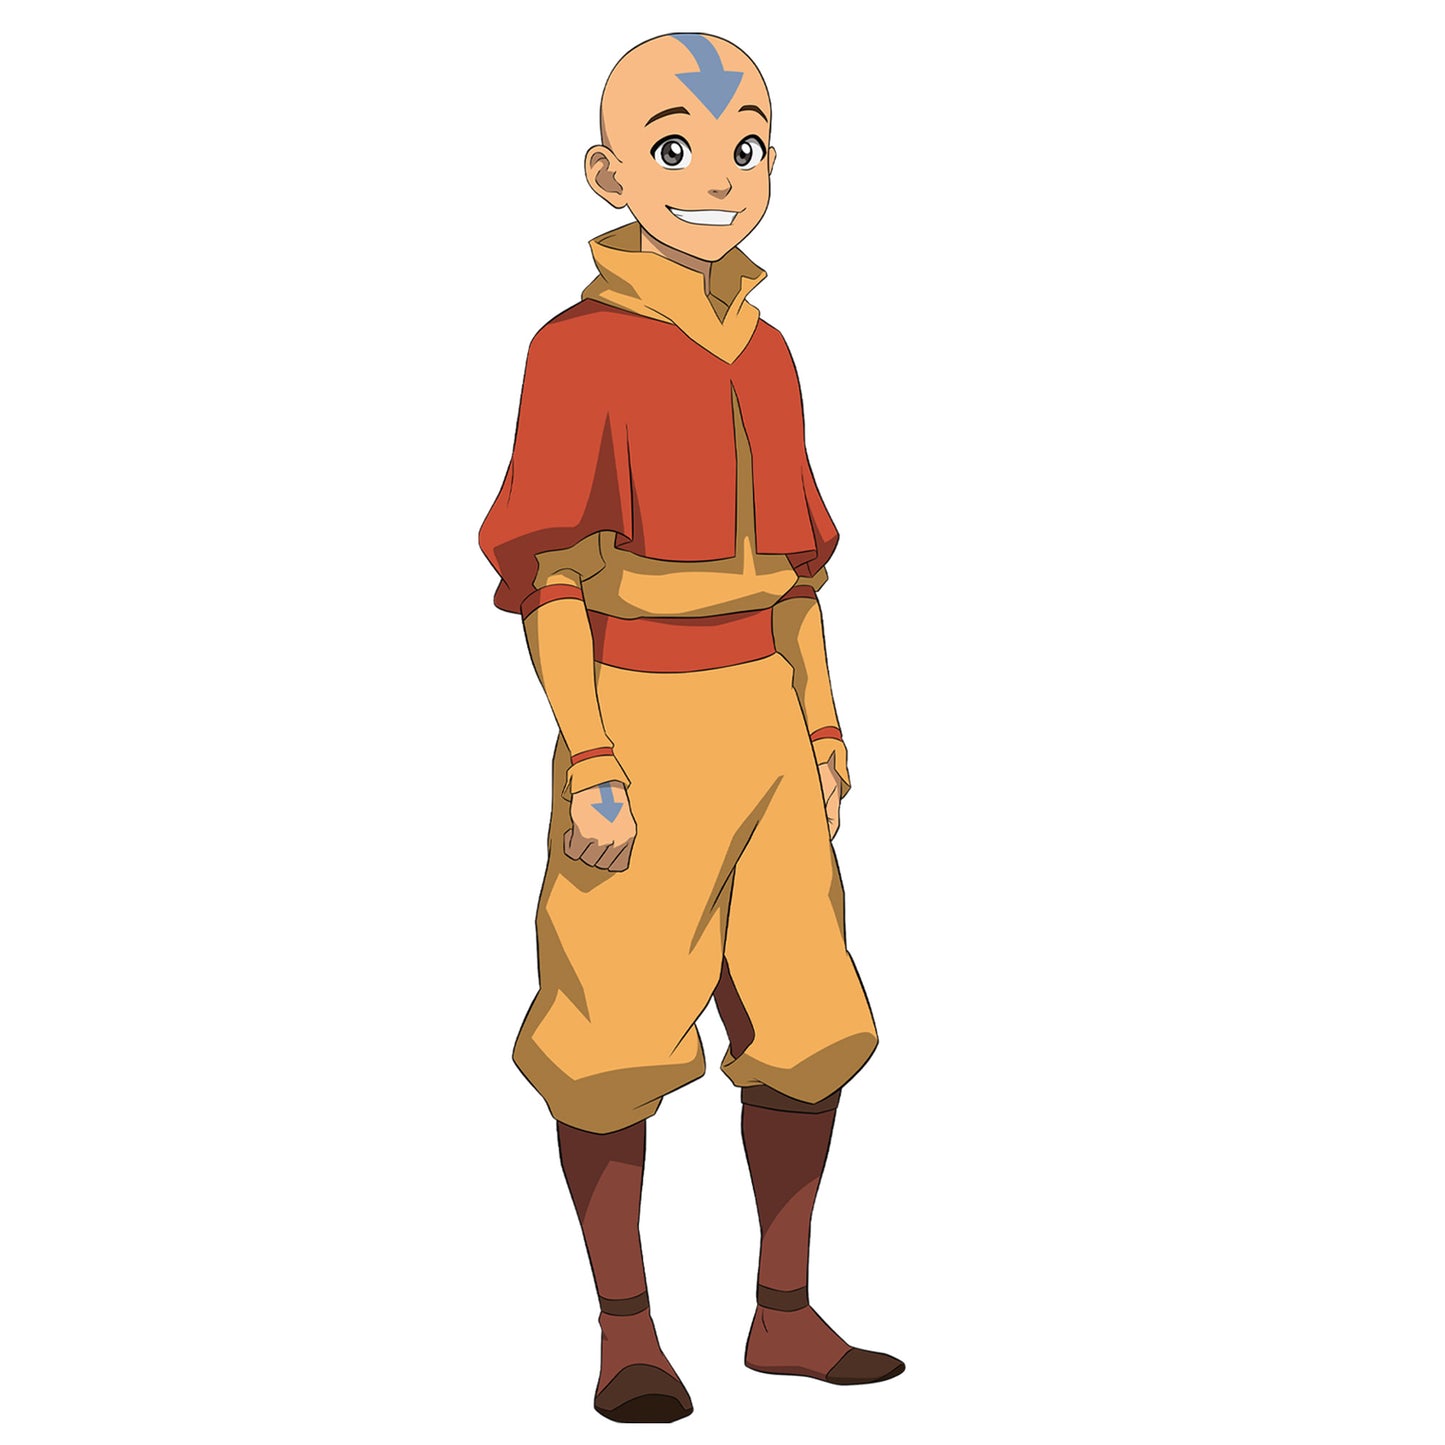 Avatar The Last Airbender: Zuko RealBigs - Officially Licensed